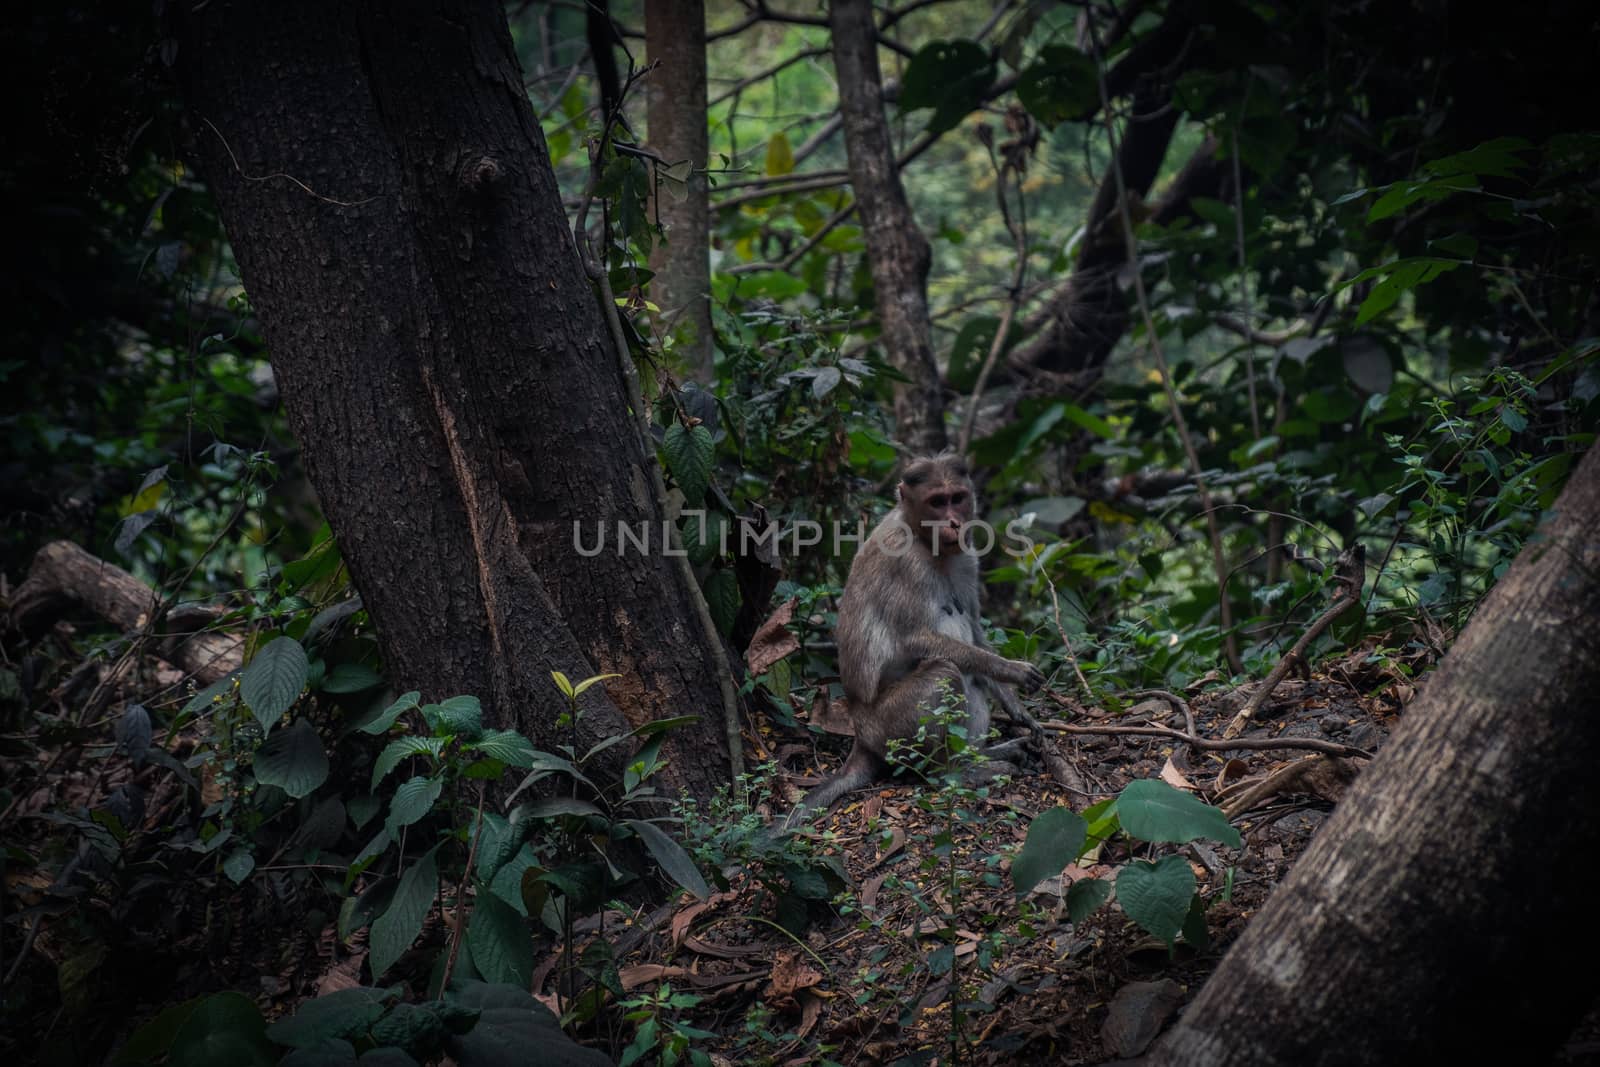 Monkey Sitting On the Ground by snep_photo